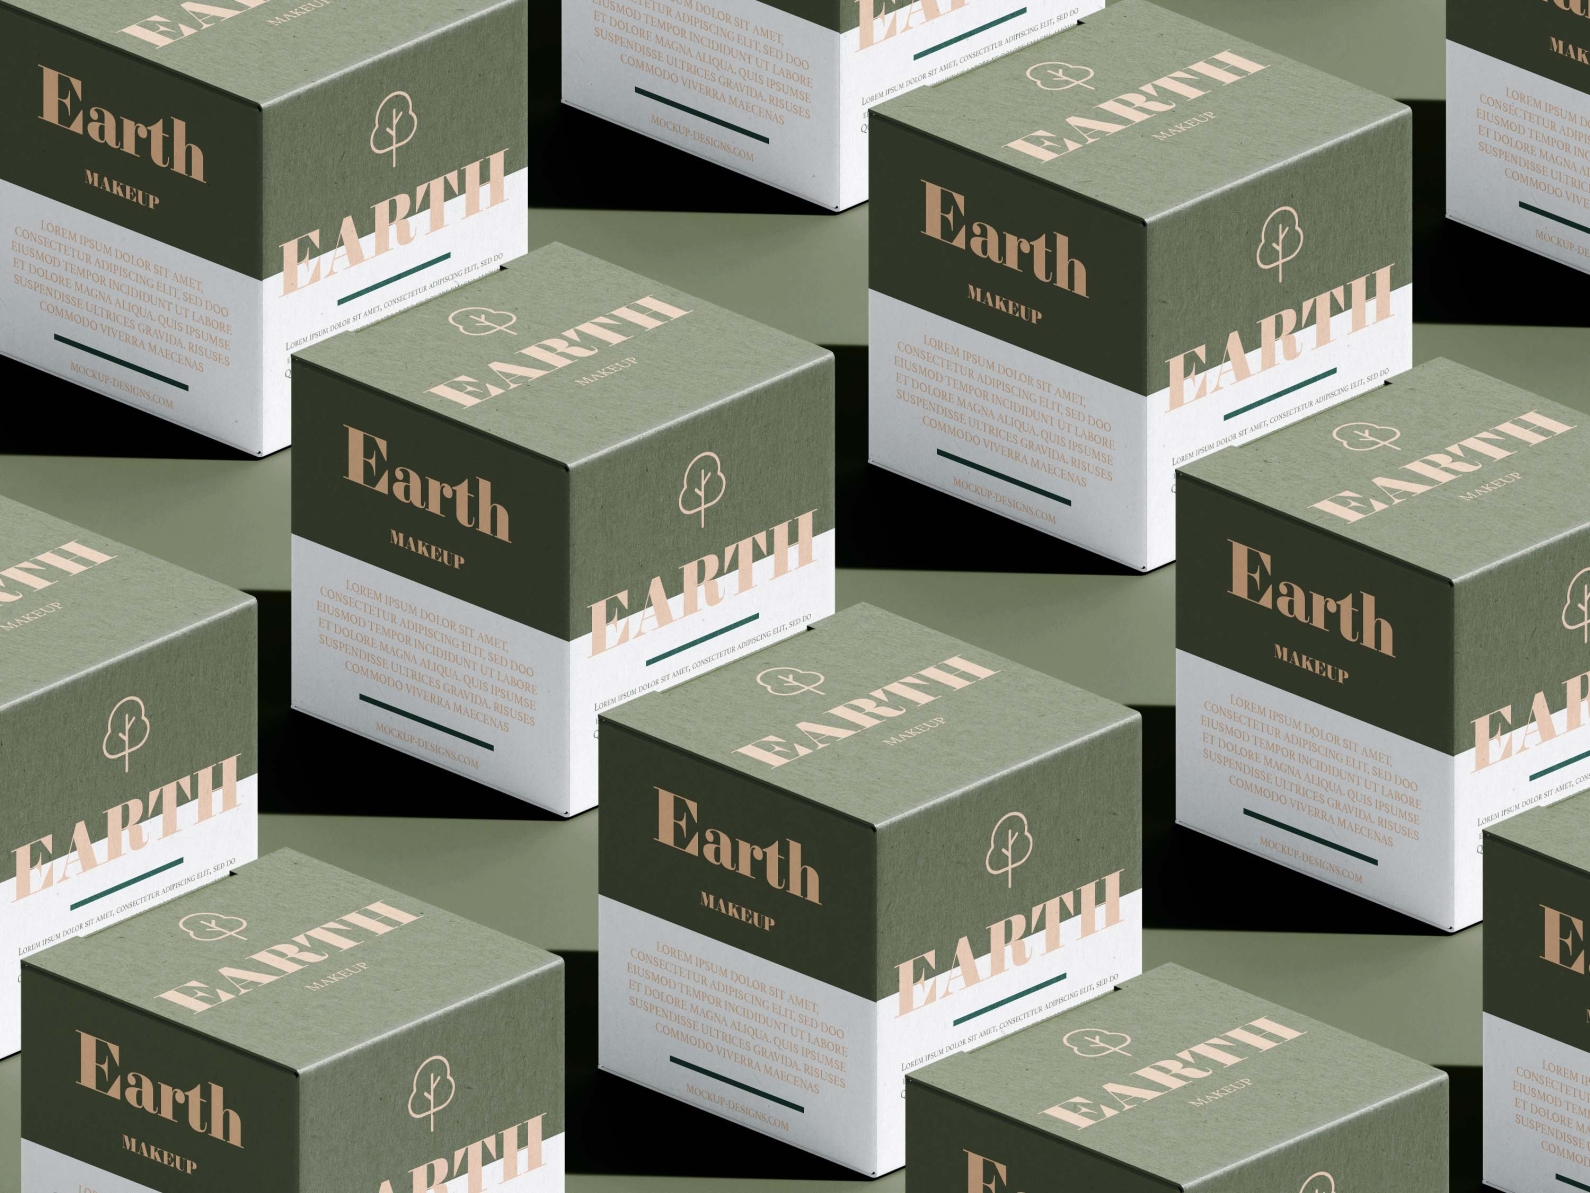 Earth makeup Outer Packaging by Madison Votzi on Dribbble